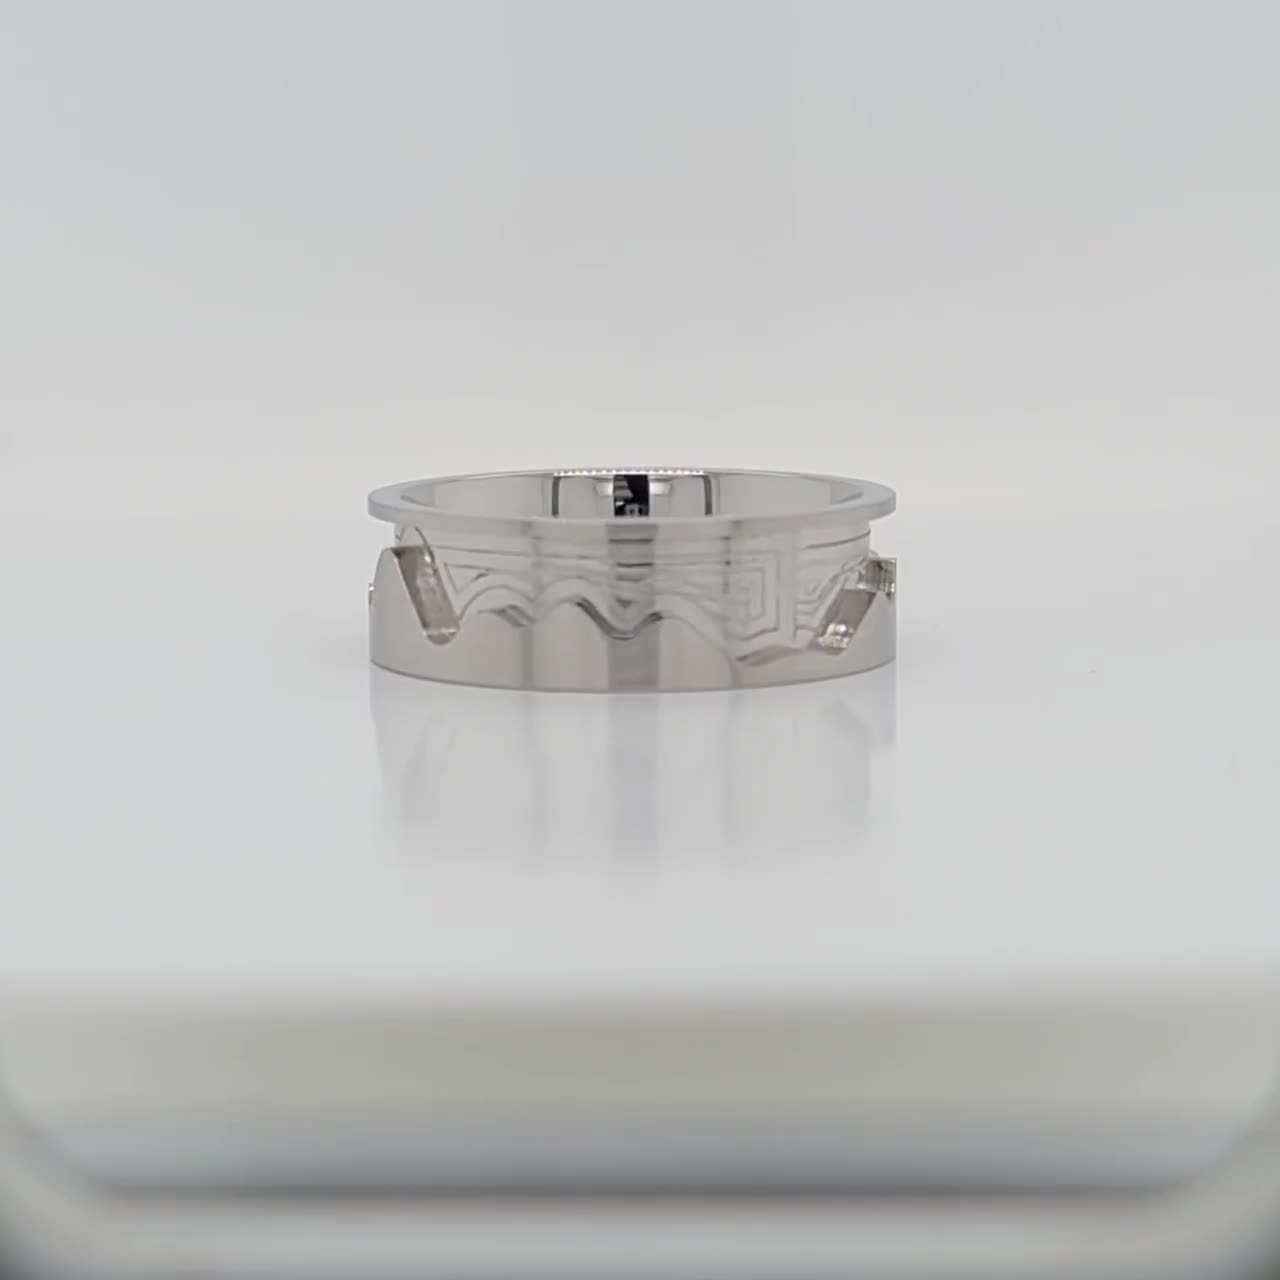 Argentium Silver 6mm Ring Core Blank Channel Inlay Custom DIY Rings 11